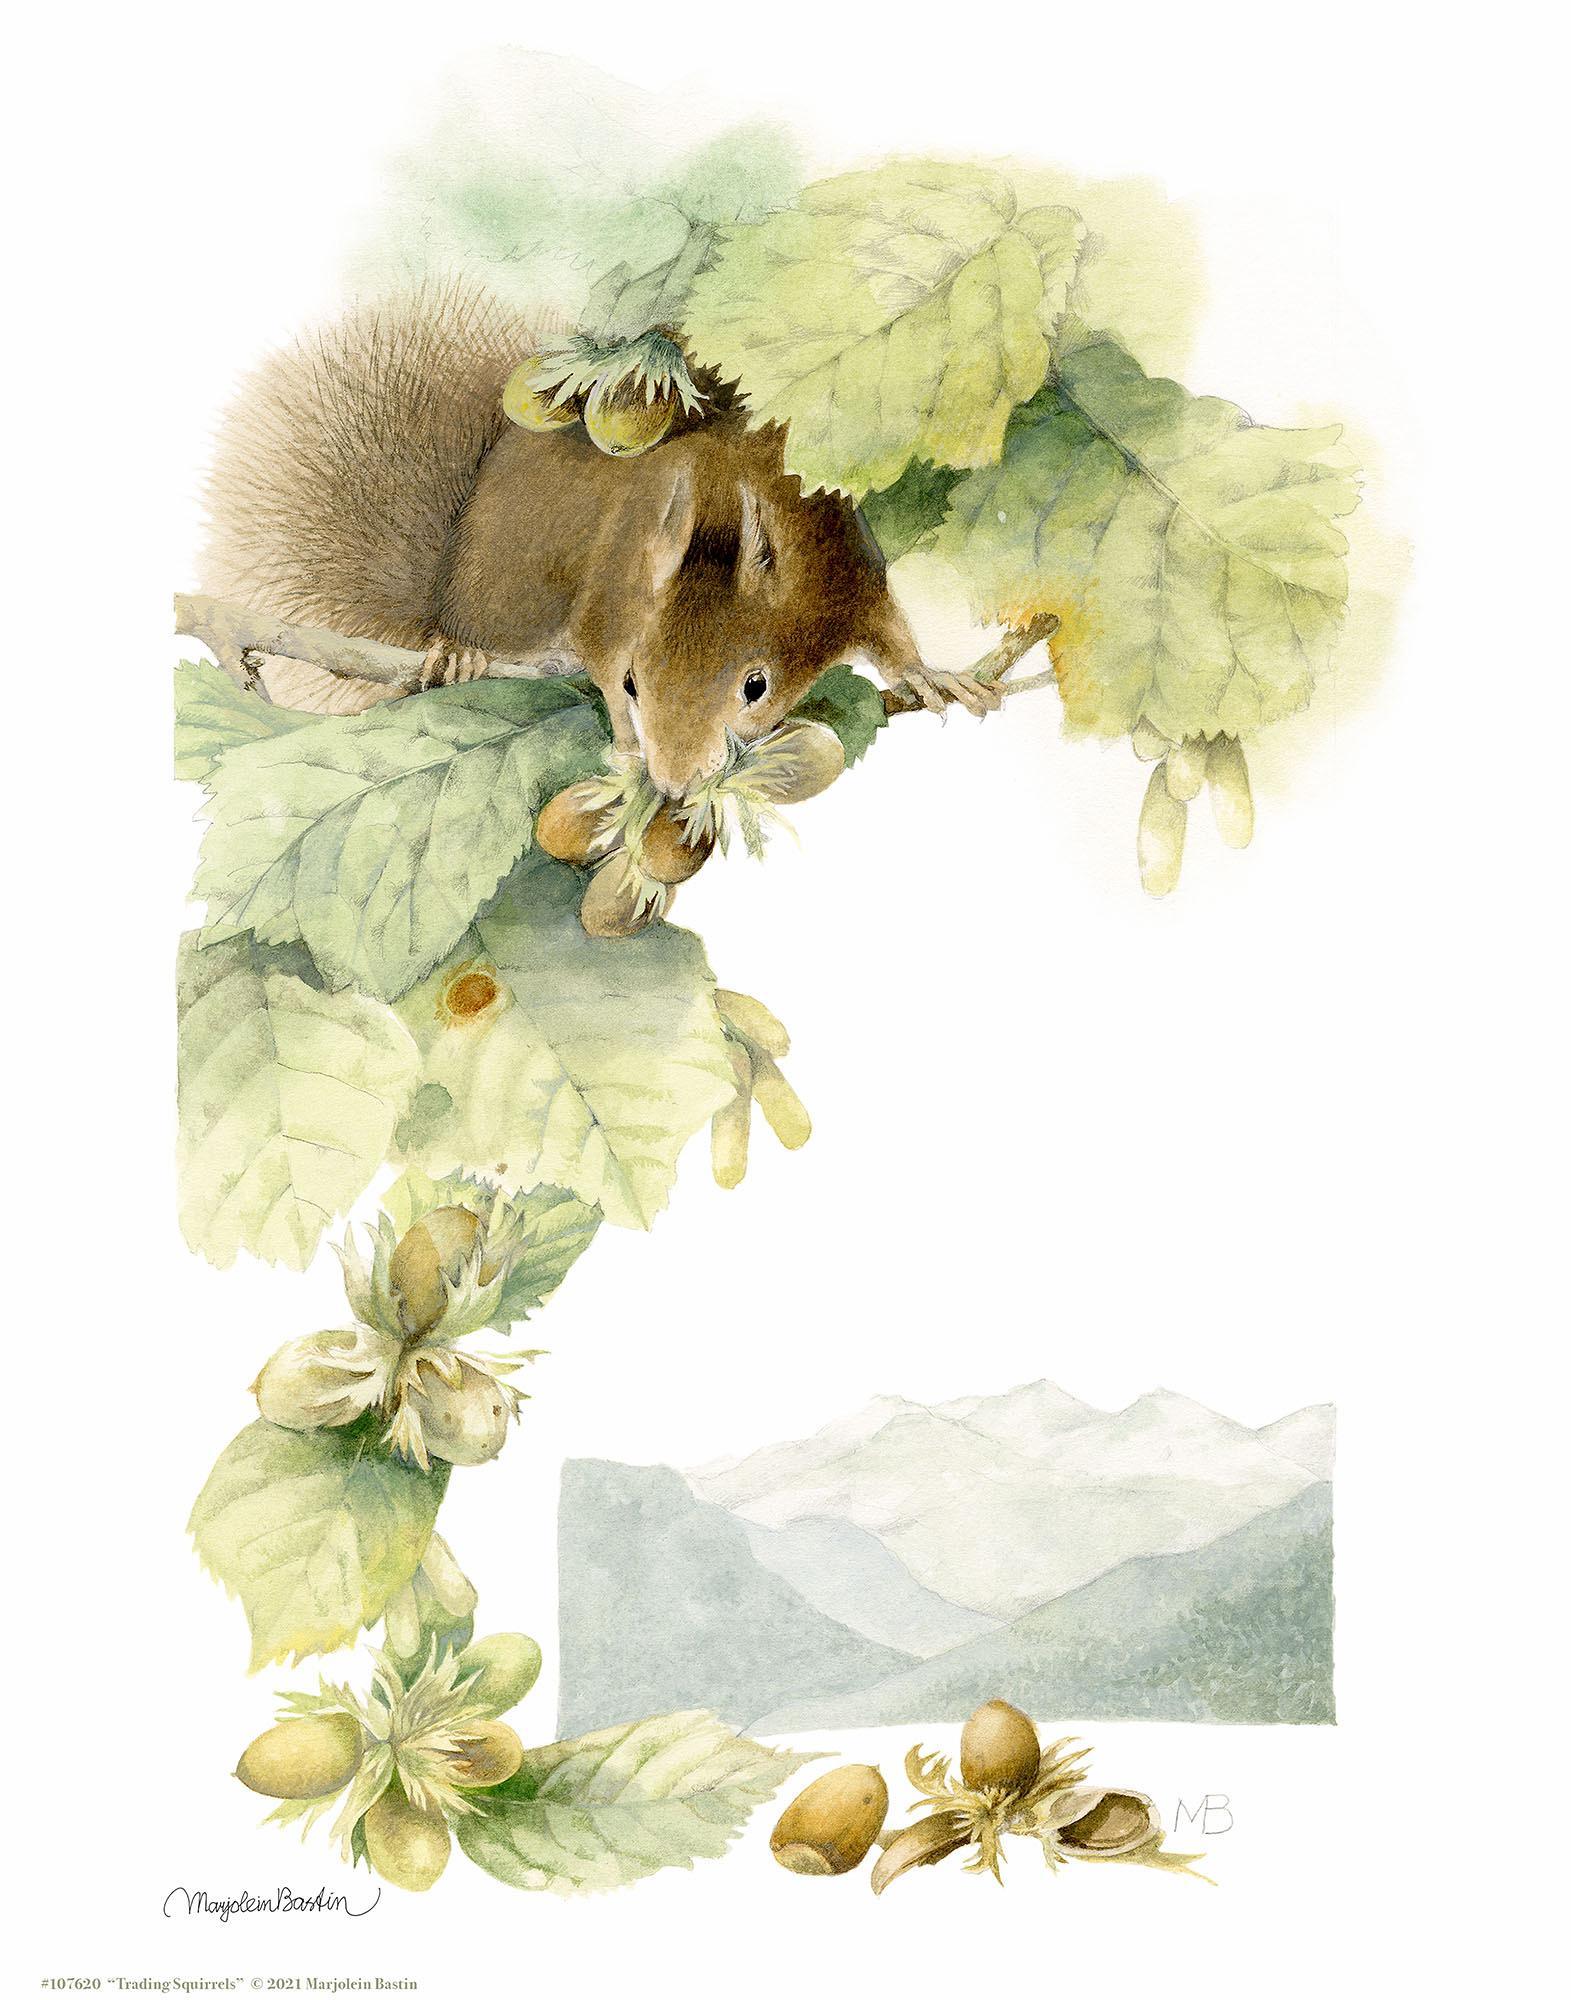 trading-squirrels-art-collection-1058781074IG.jpg